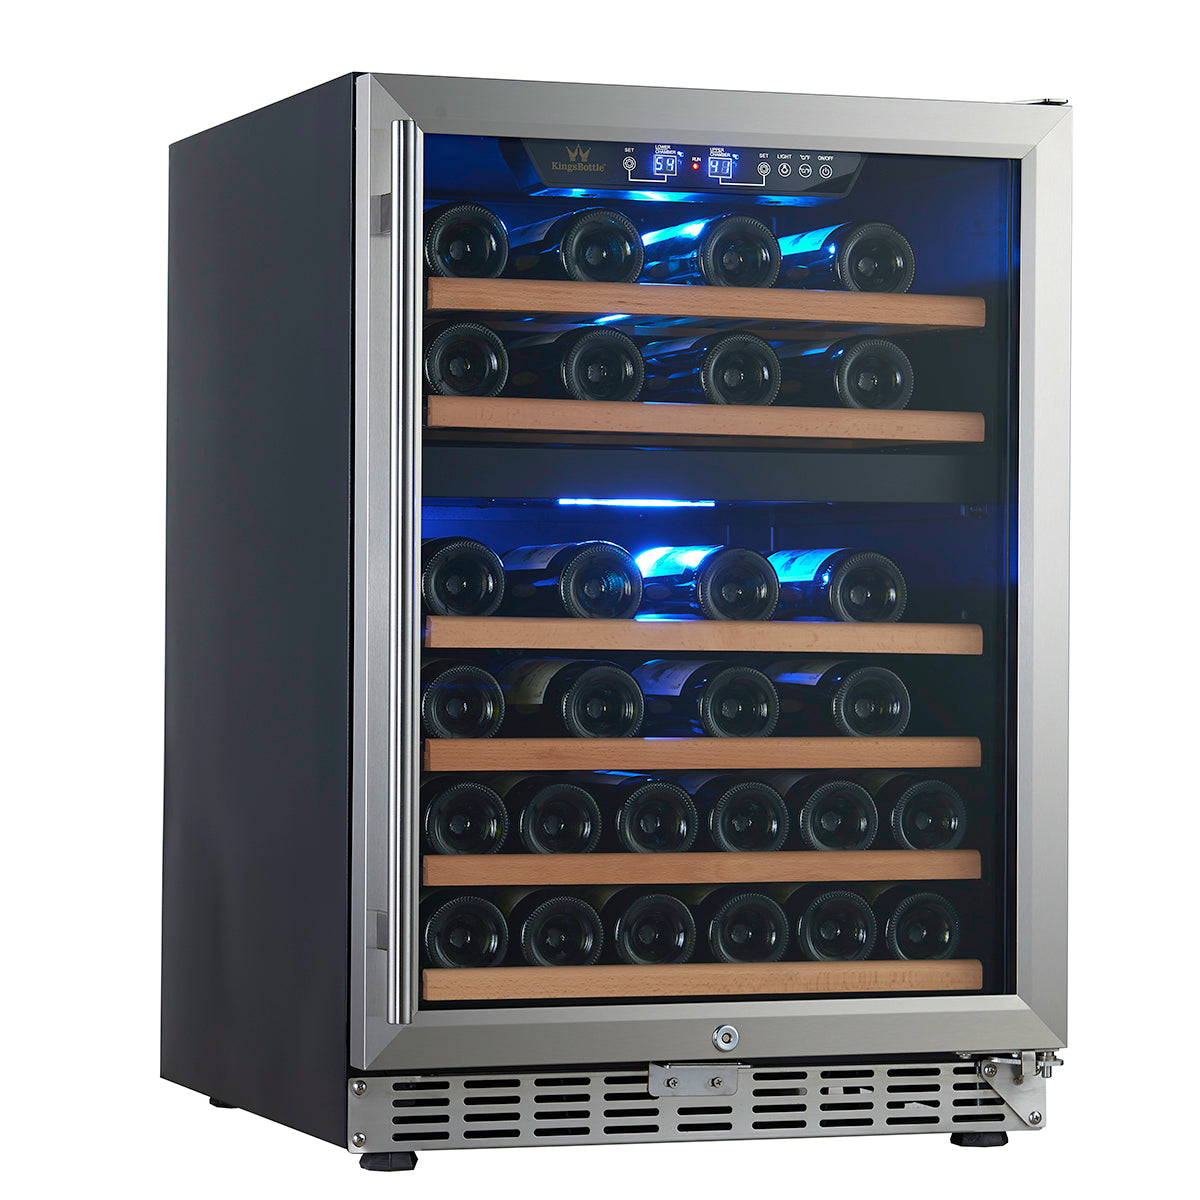 24" Dual Zone Built-in Wine Cooler | Triple Glassdoor With Two Low-E -KBUSF54D-SS